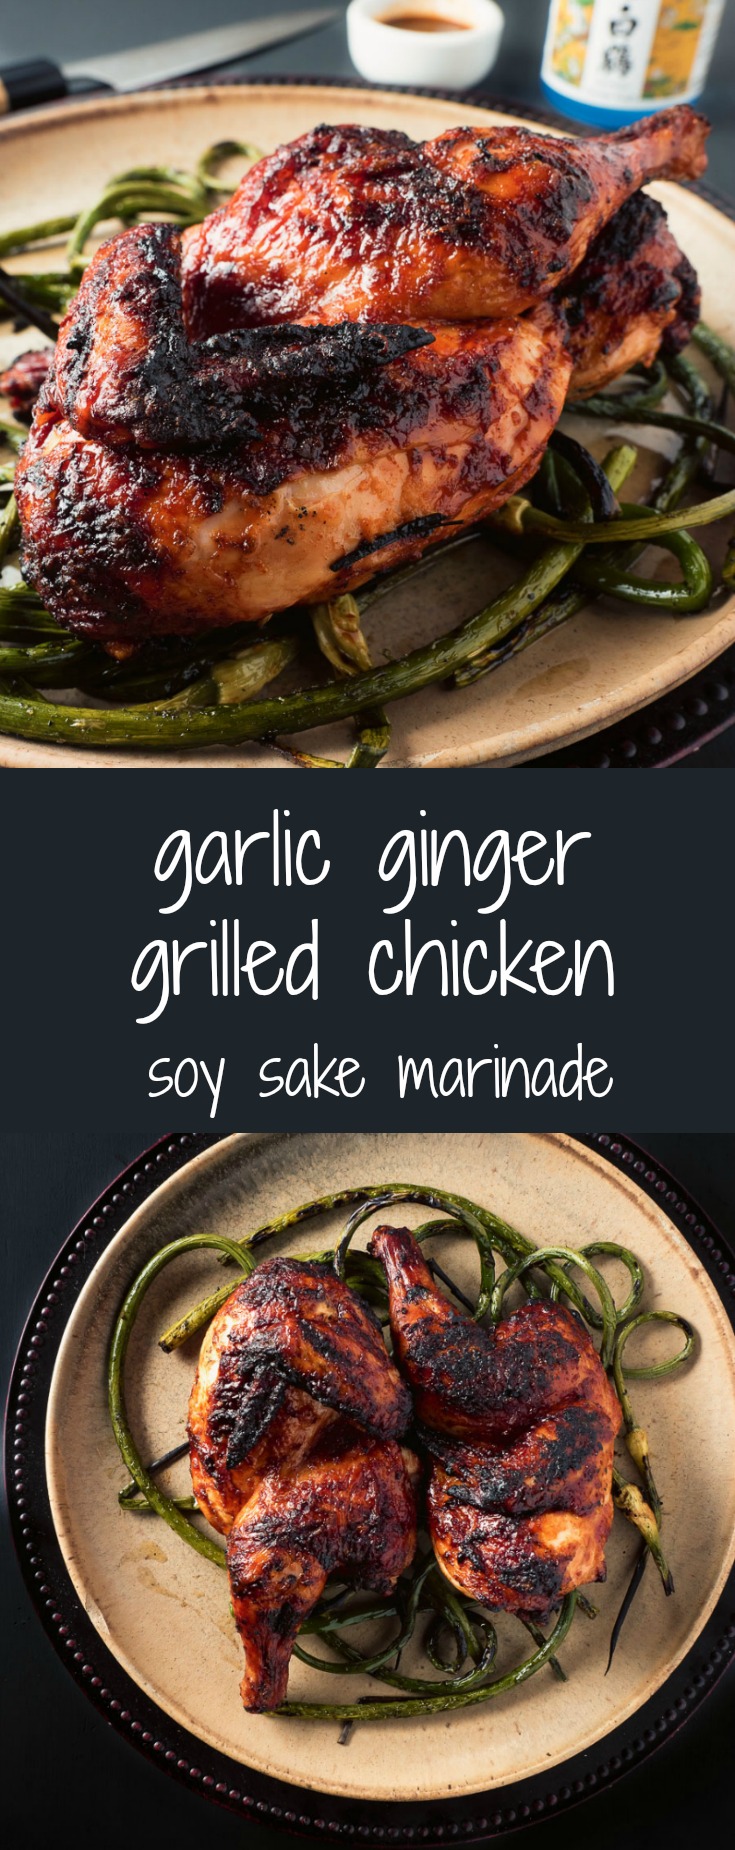 Garlic ginger grilled chicken bursts with Japanese flavours but is adapted to western grilling techniques.